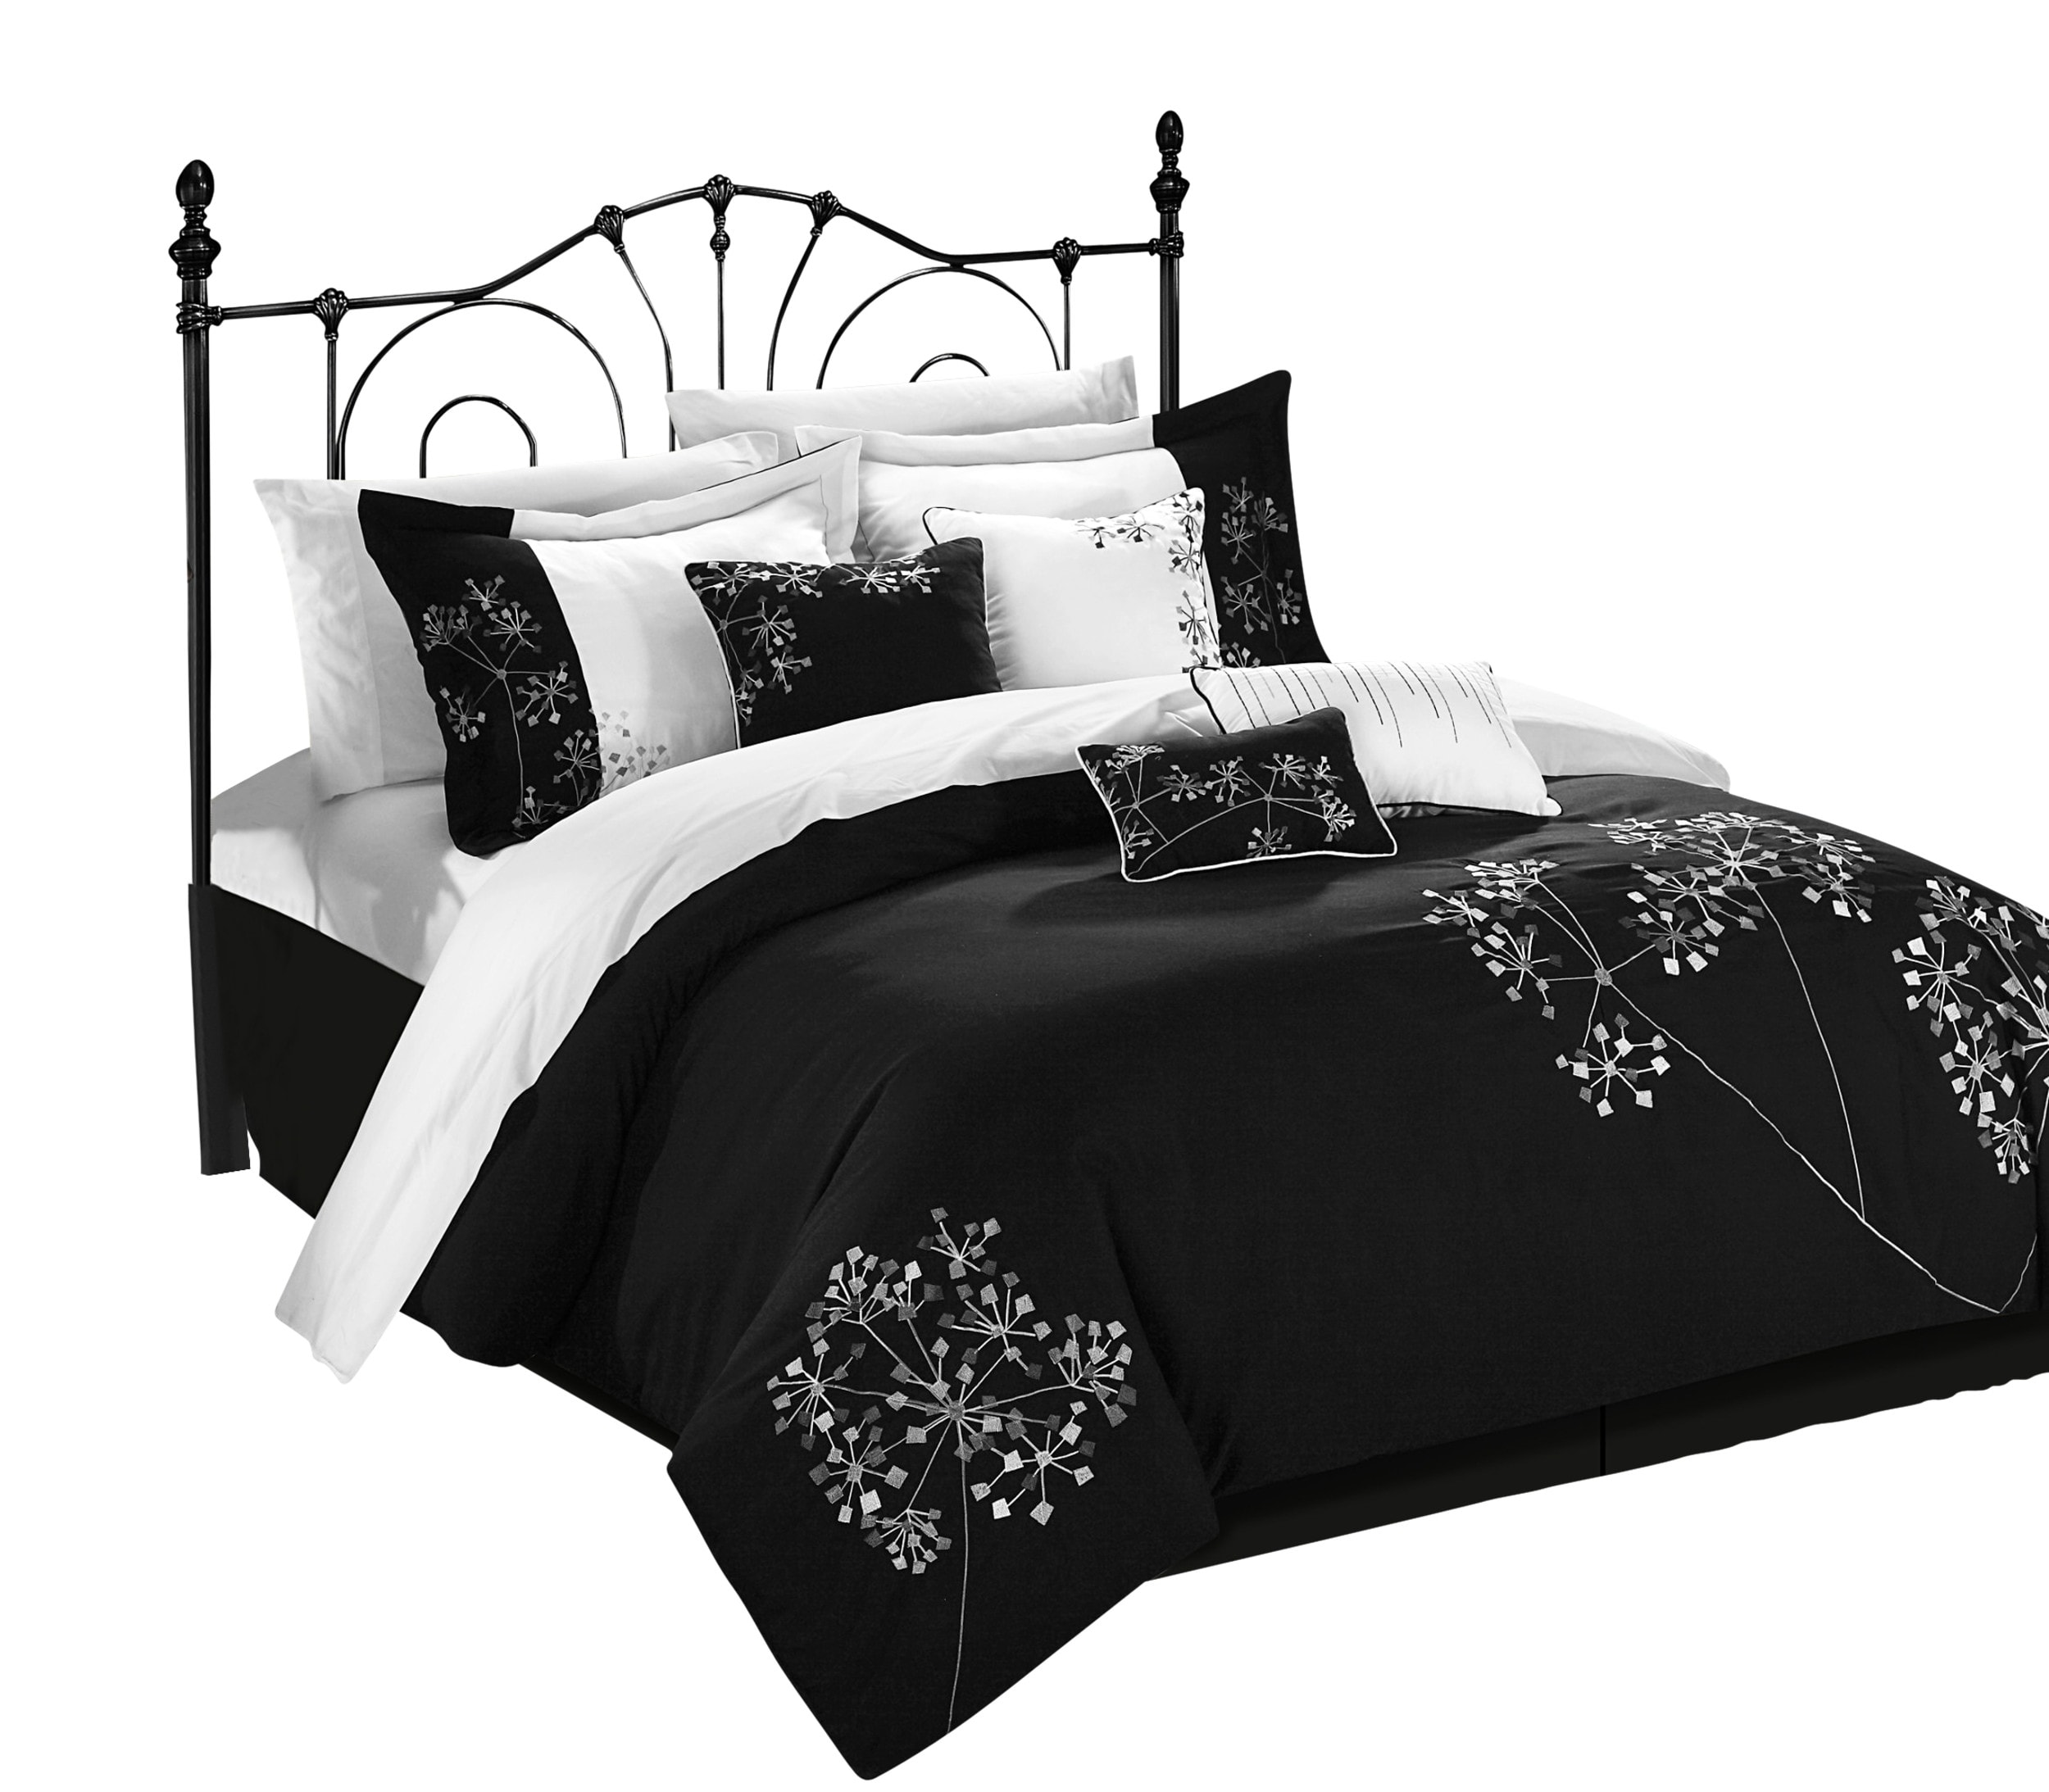 Baroque Damask Duvet Cover Twin Black White Gothic Boho Floral Bedding Set  For Boys Girls Abstract Adults Geometric Flowers Comforter Cover,European  Victorian Style Quilt Cover 1 Pillow Case 